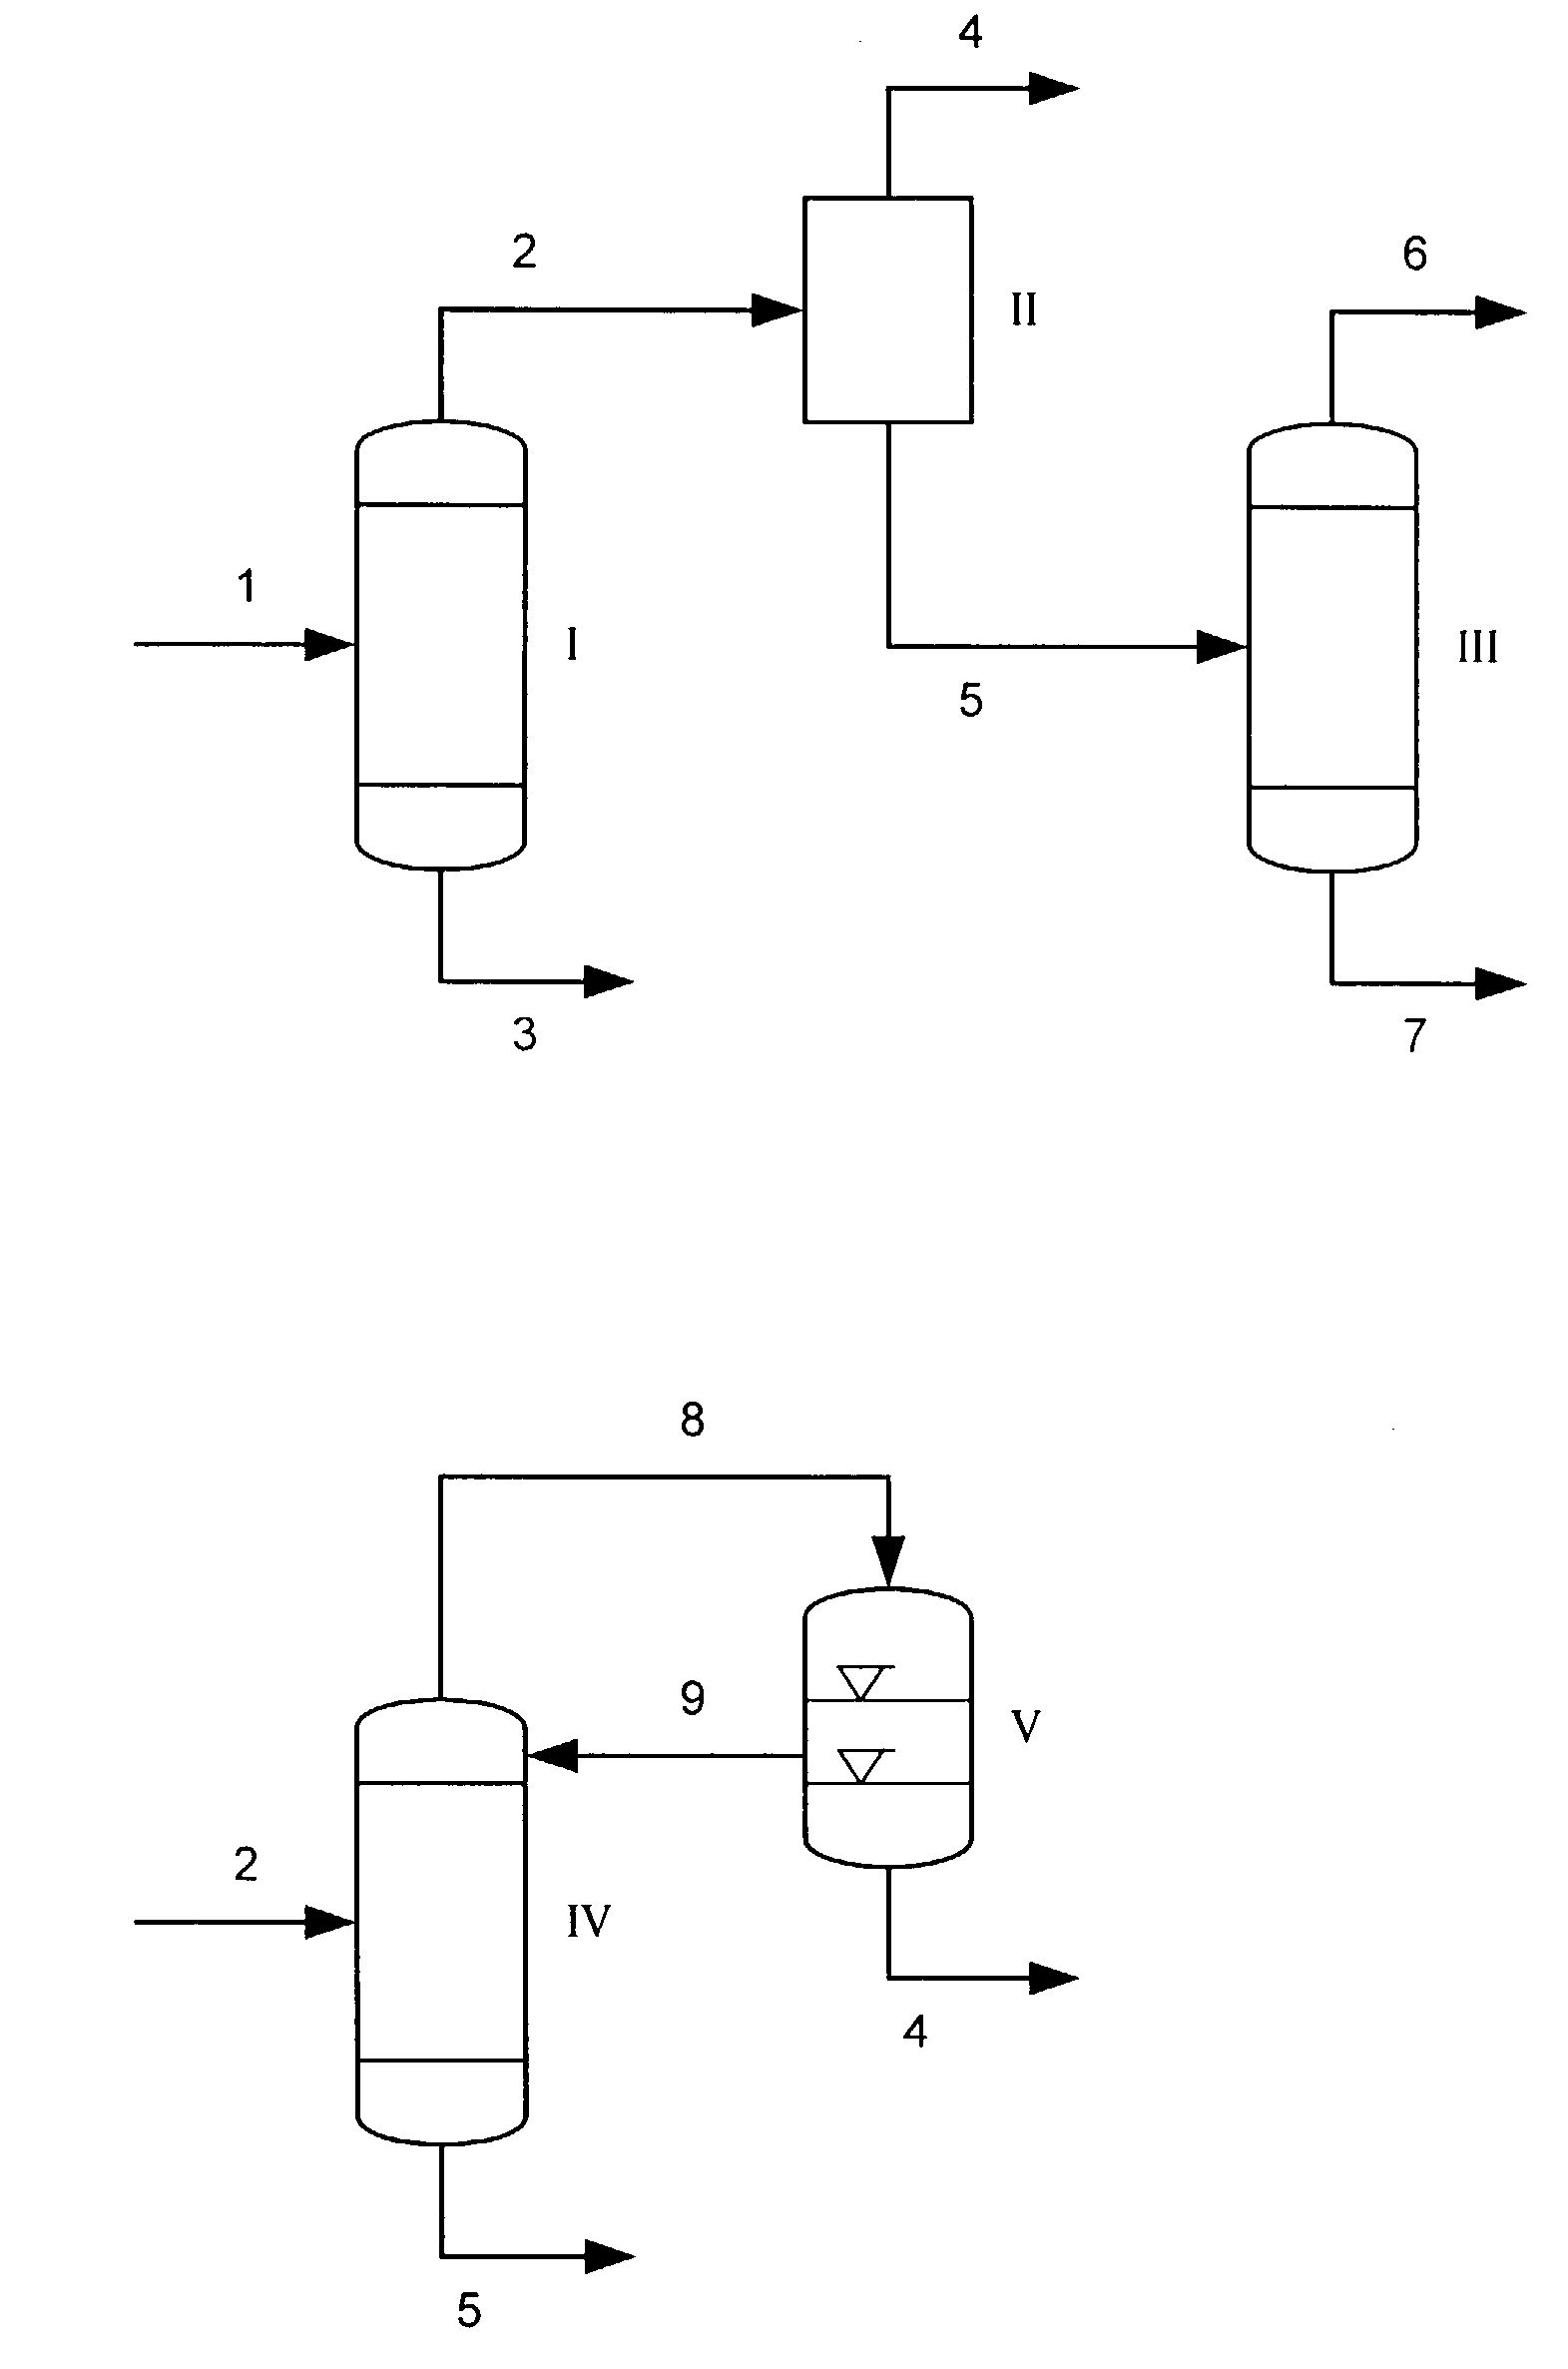 Process of separating 1-methoxy-2-propanol and 2-methoxy-1-propanol from aqueous compositions